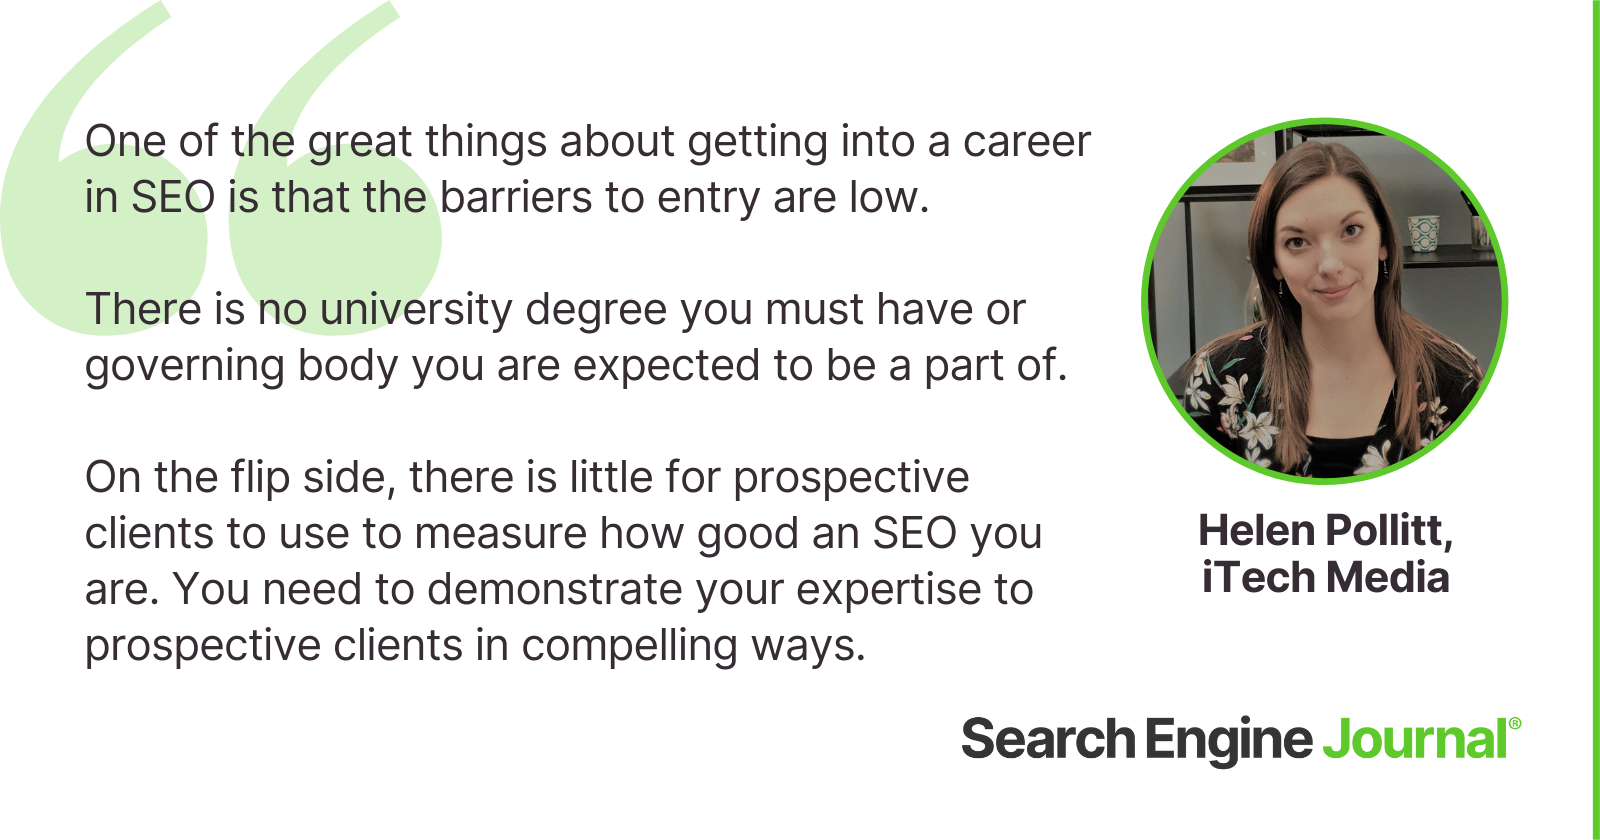 Helen Pollitt on selling yourself as an SEO consultant.